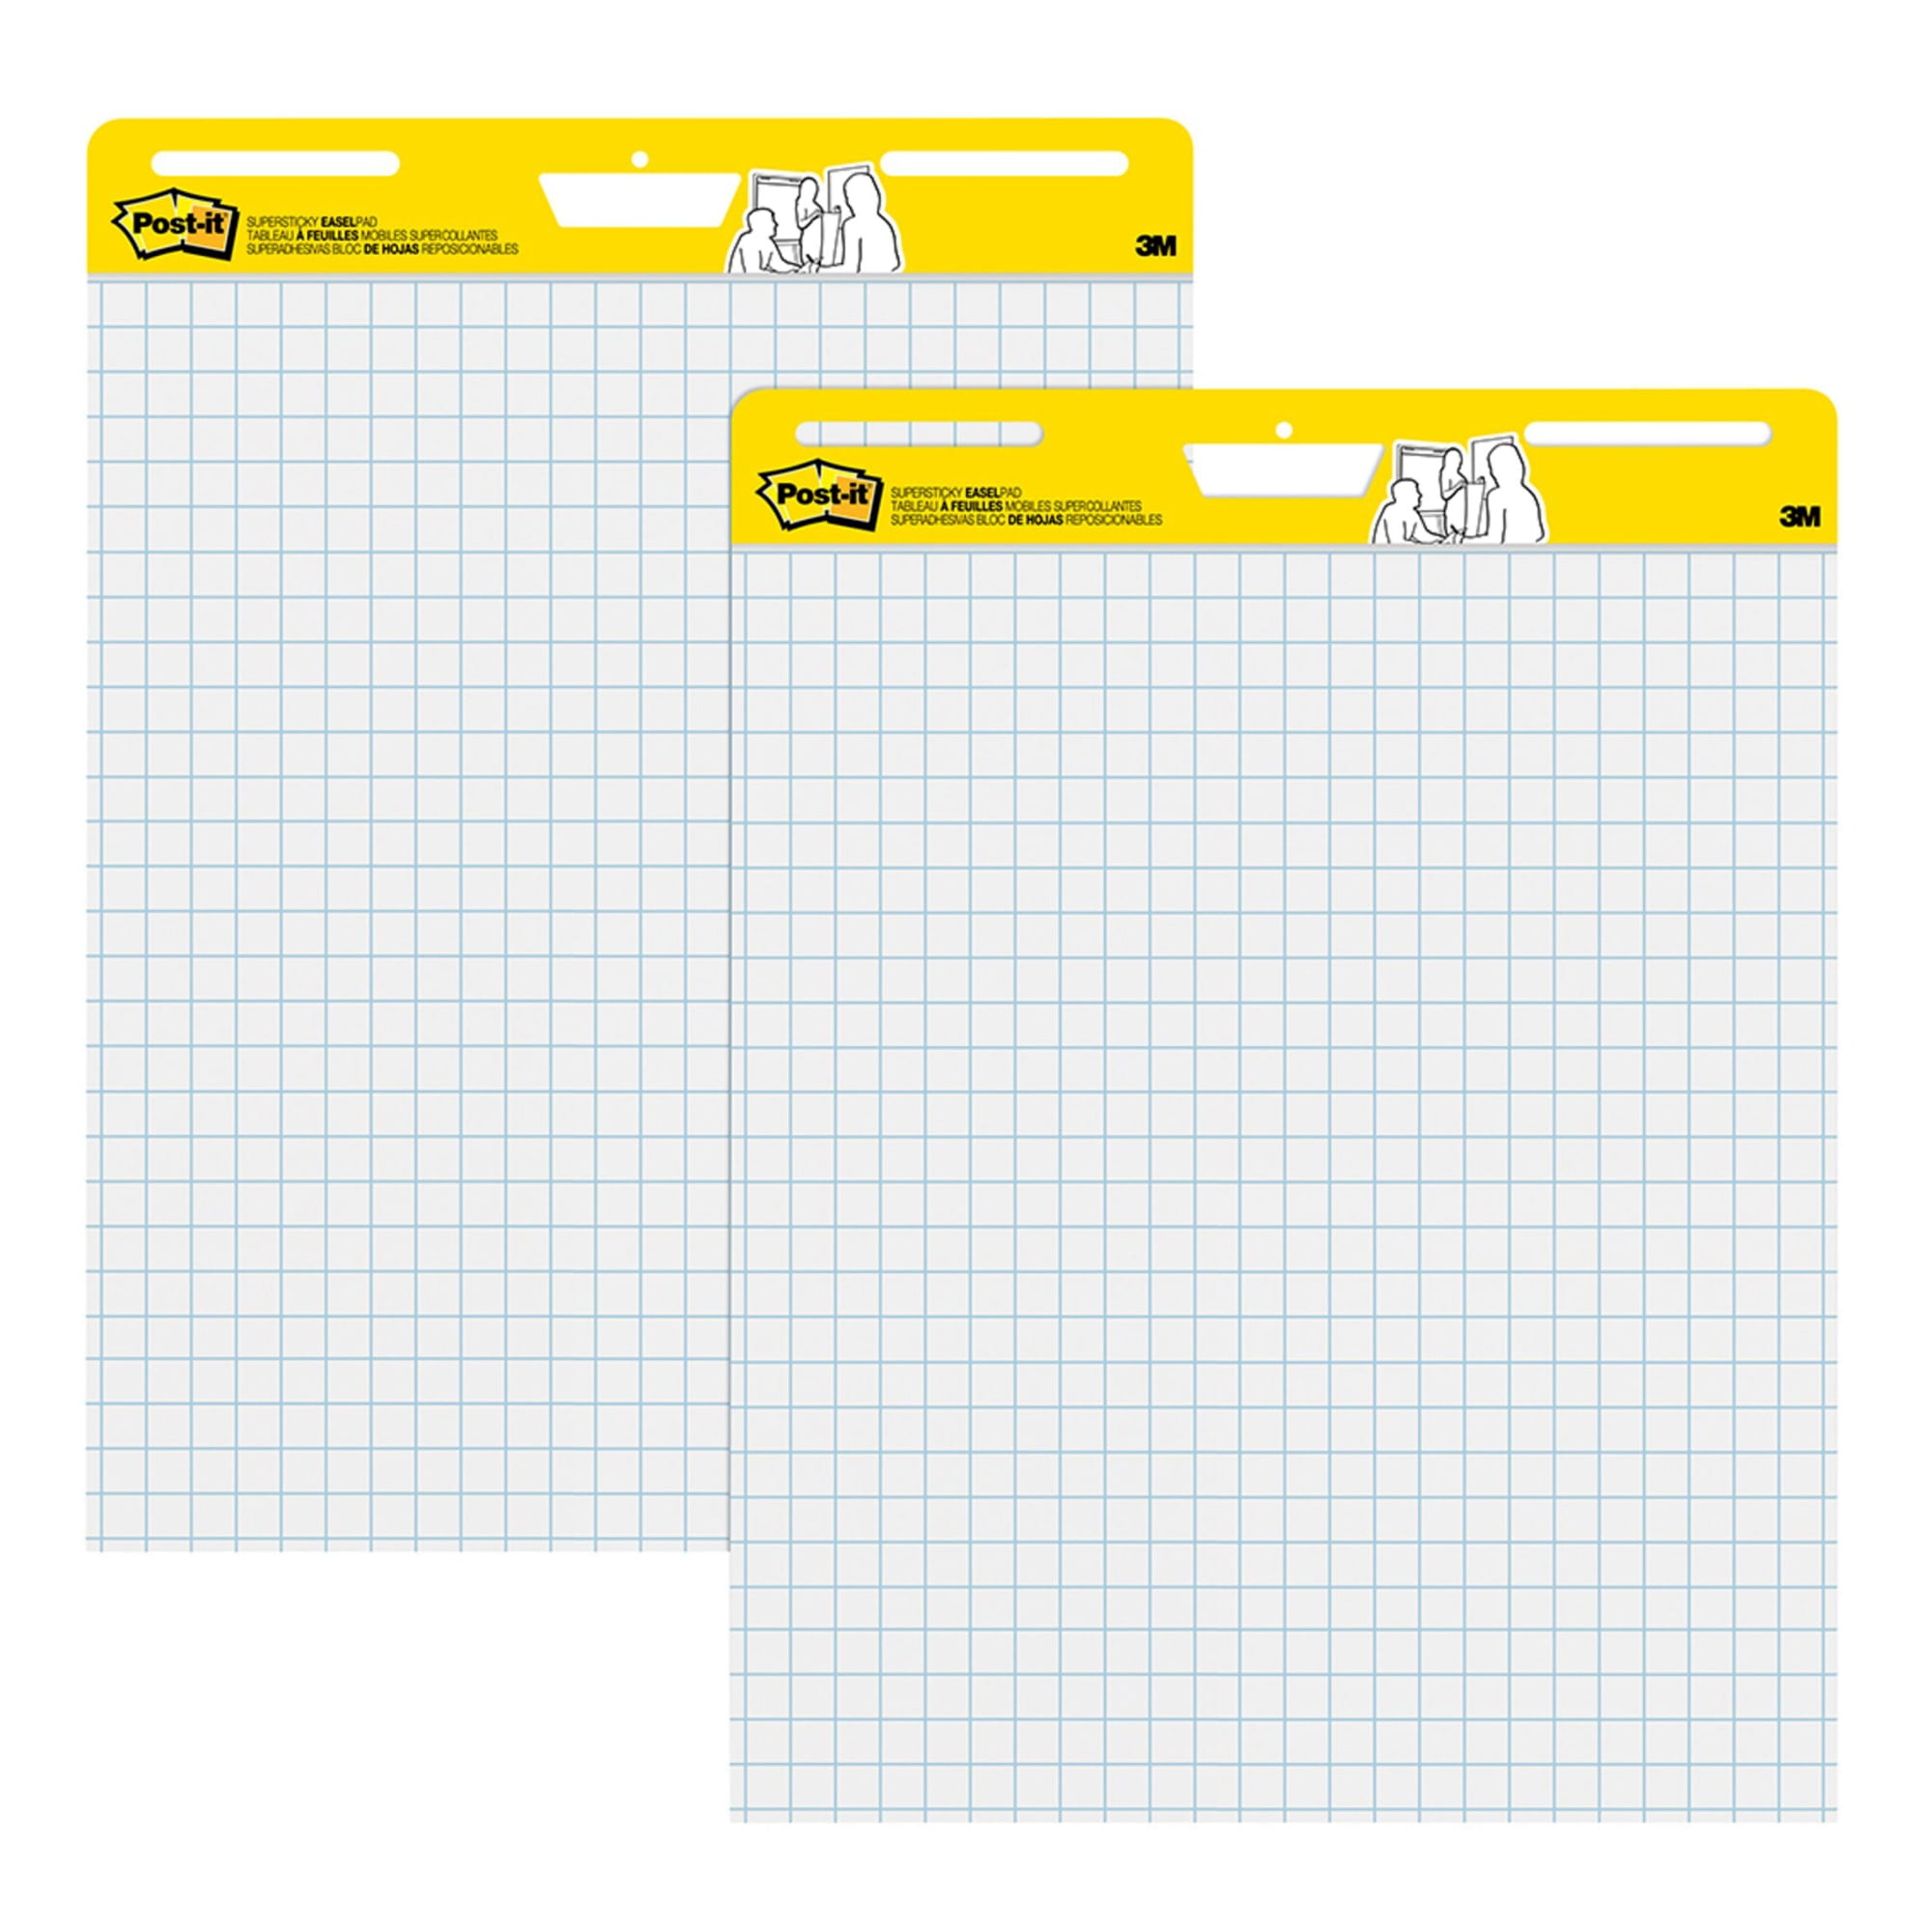 InstaGraphs adhesive grid and graph paper (sticky graphs)